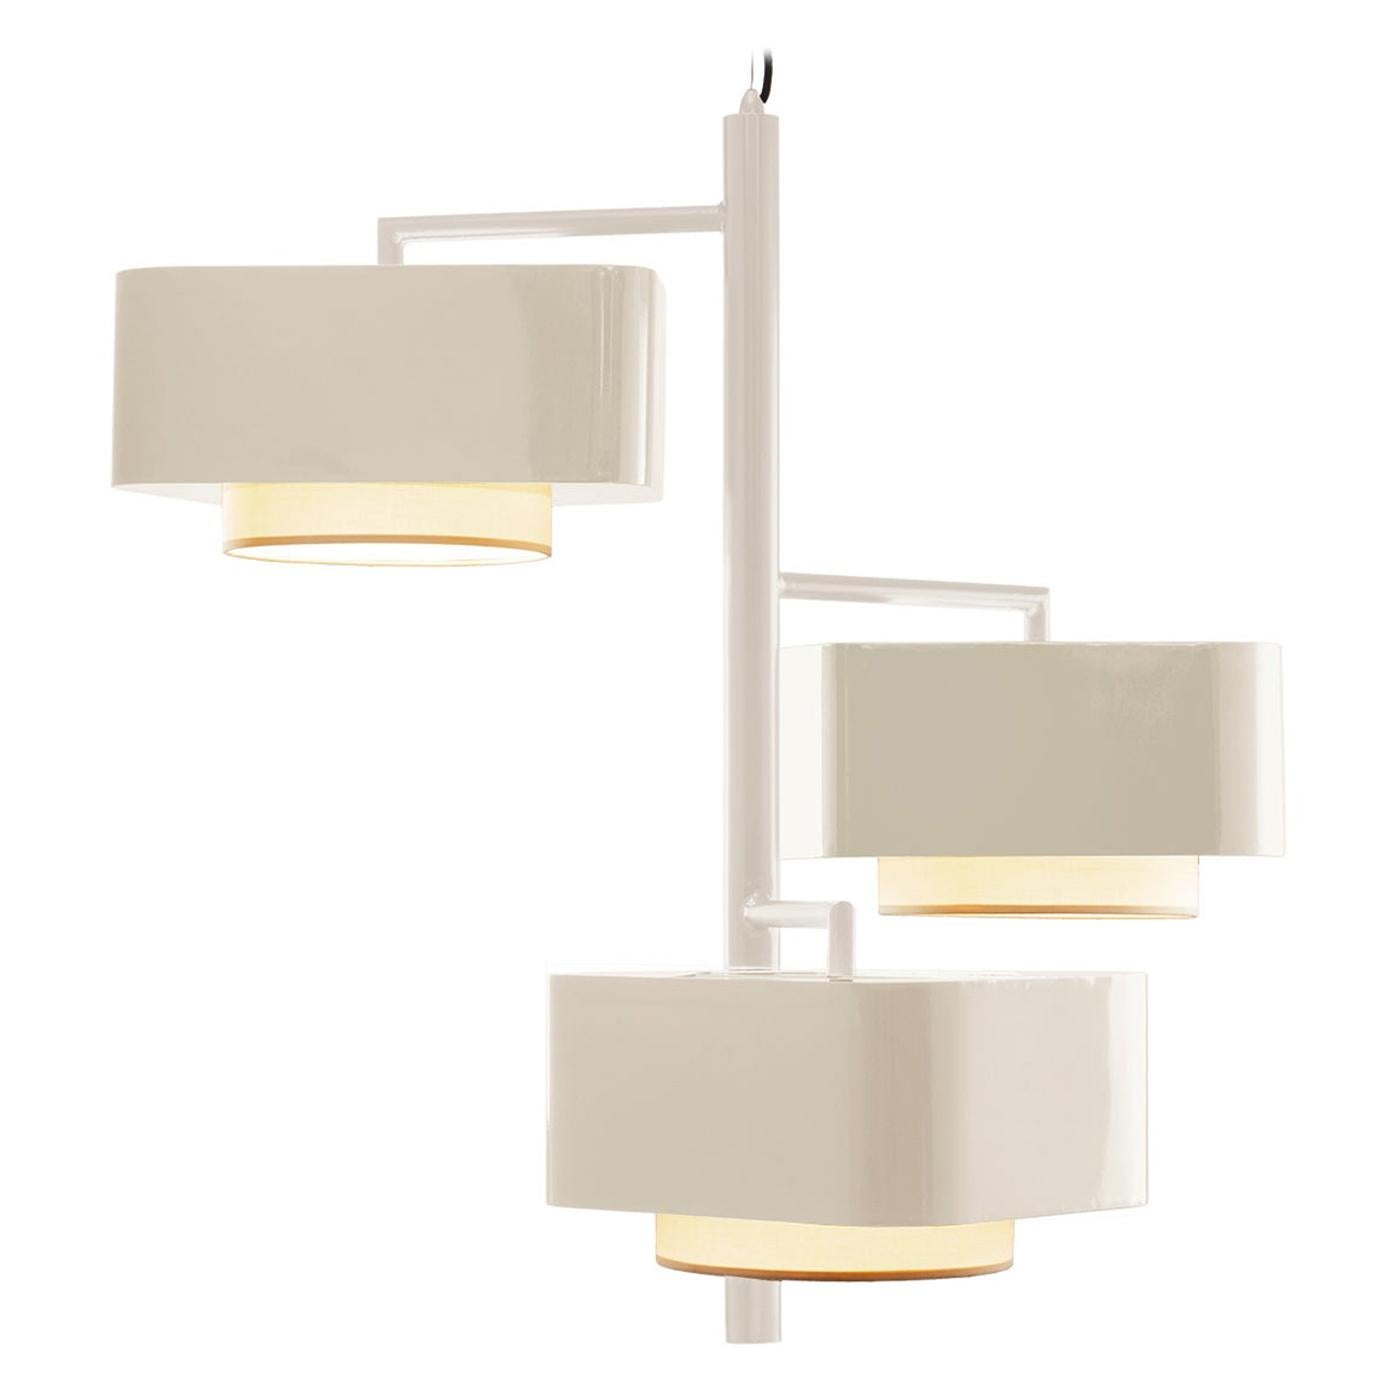 Contemporary Art Deco inspired Carousel I Suspension Lamp in Off-White Ivory